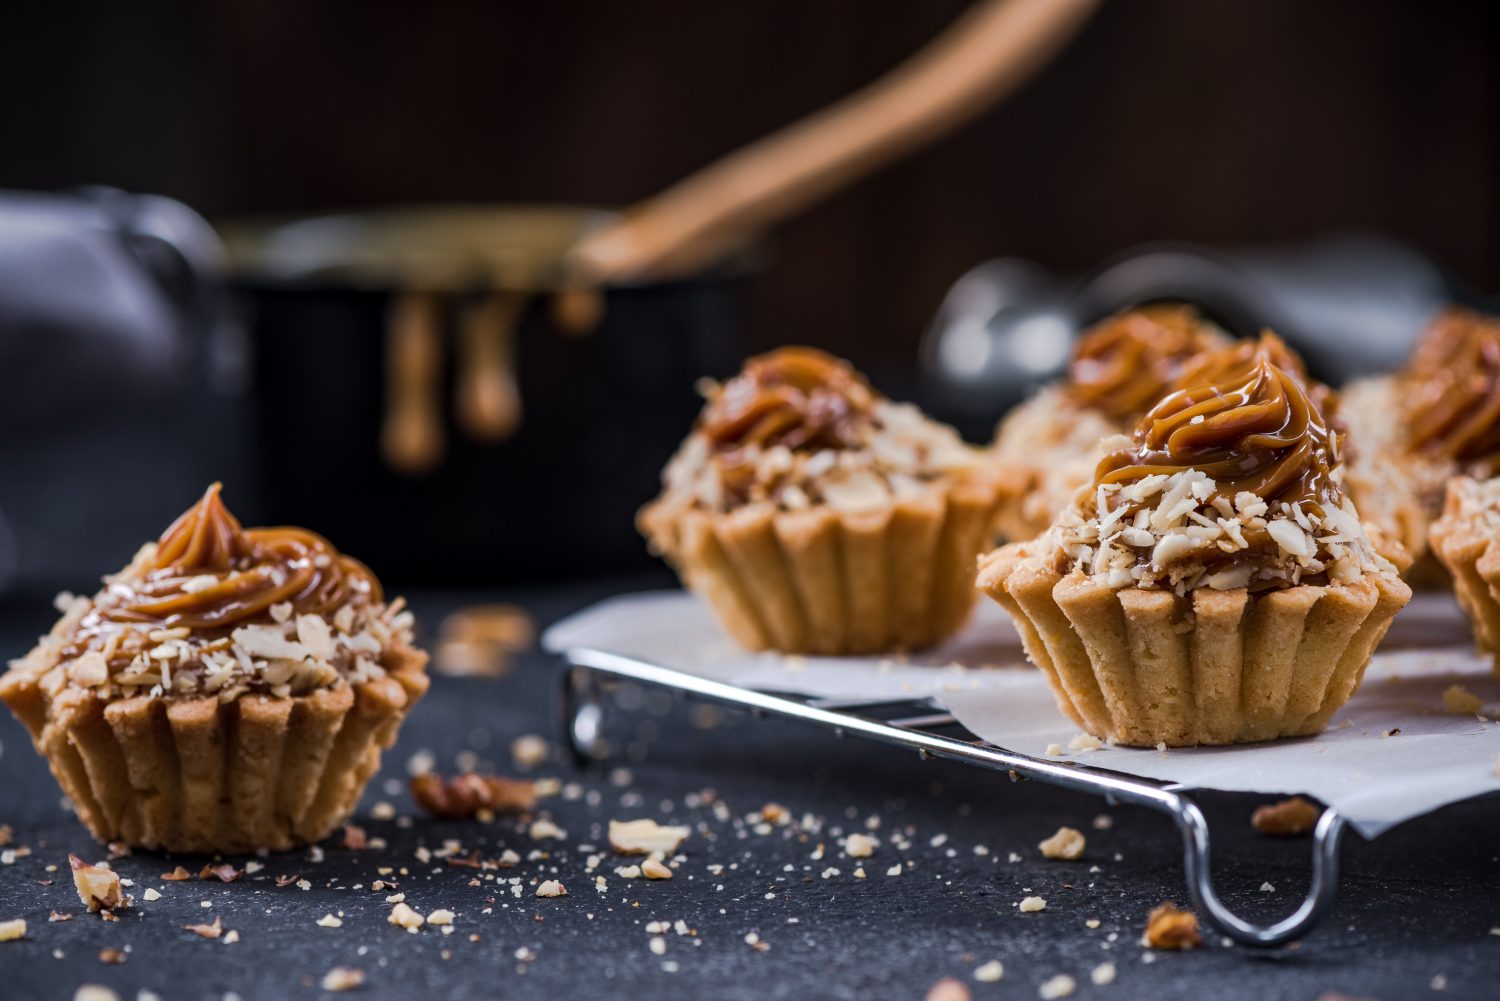 Small cupcakes with toffee caramel and walnuts 2021 08 26 16 37 32 utc scaled